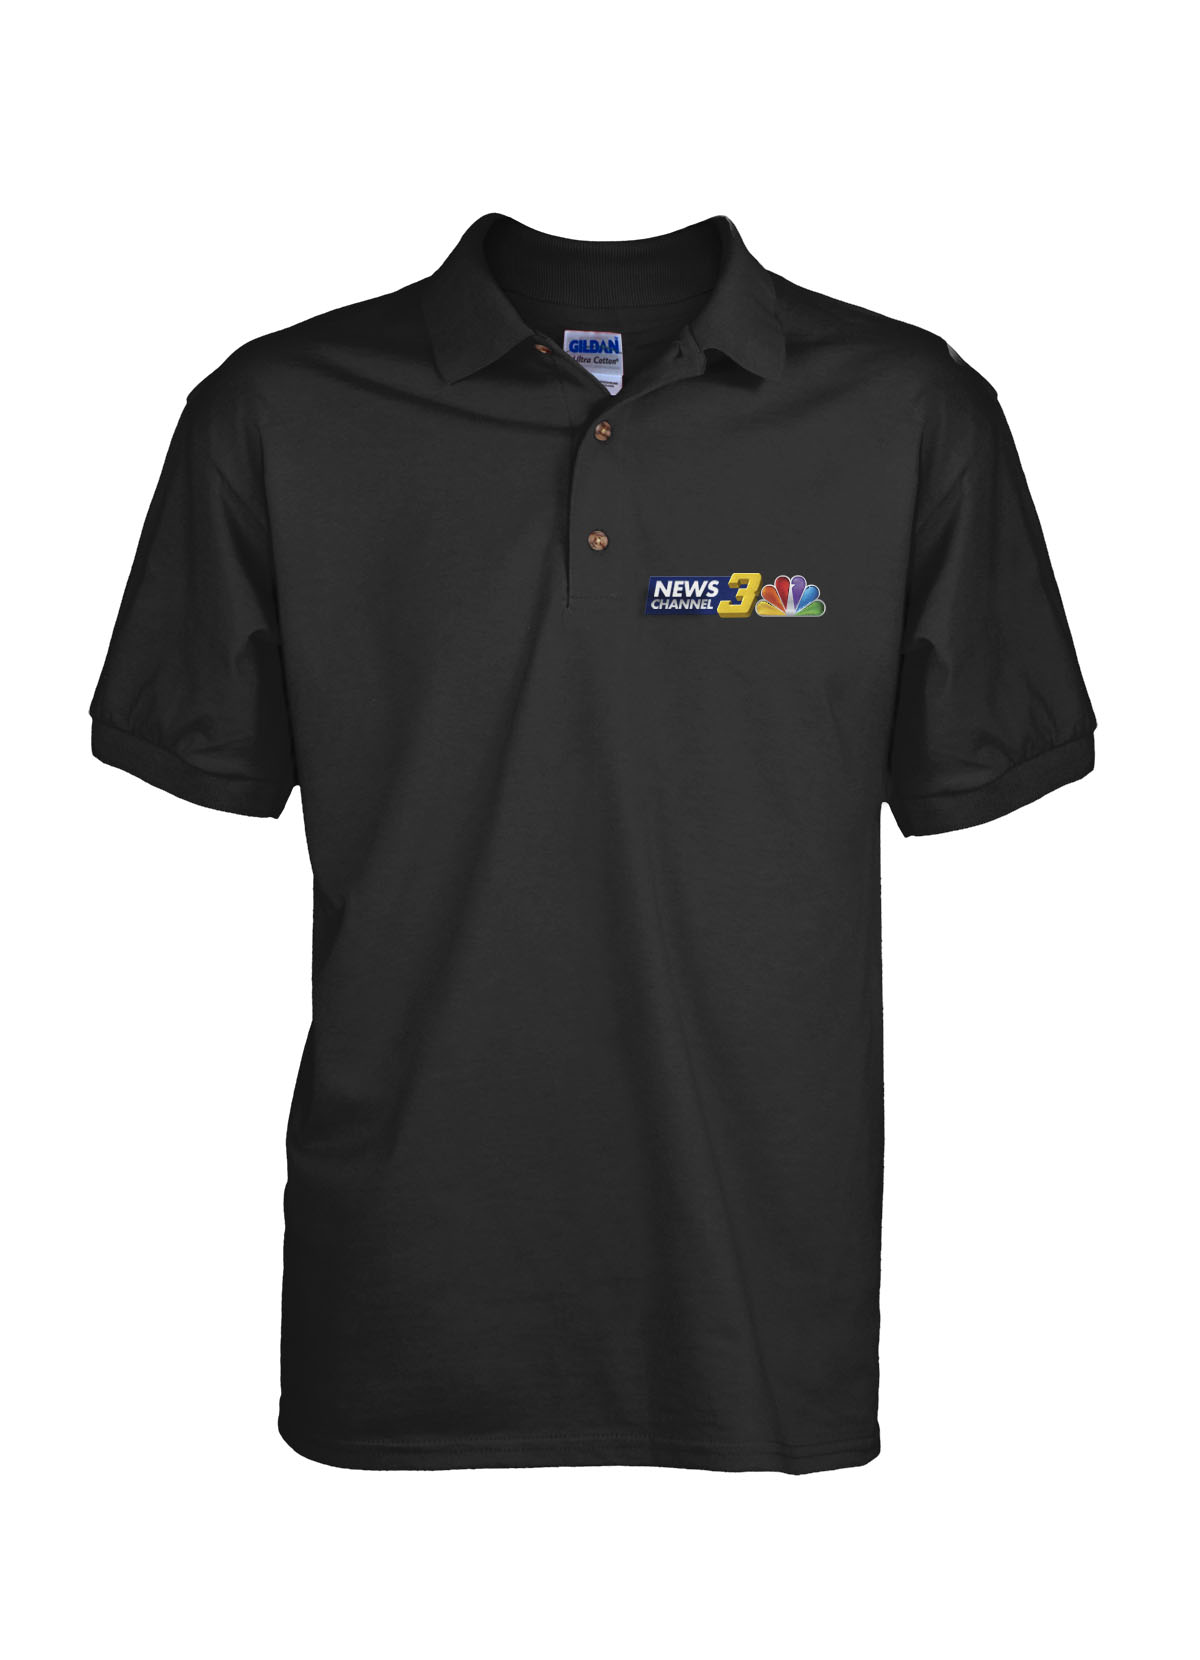 Channel 3 polo front.jpg